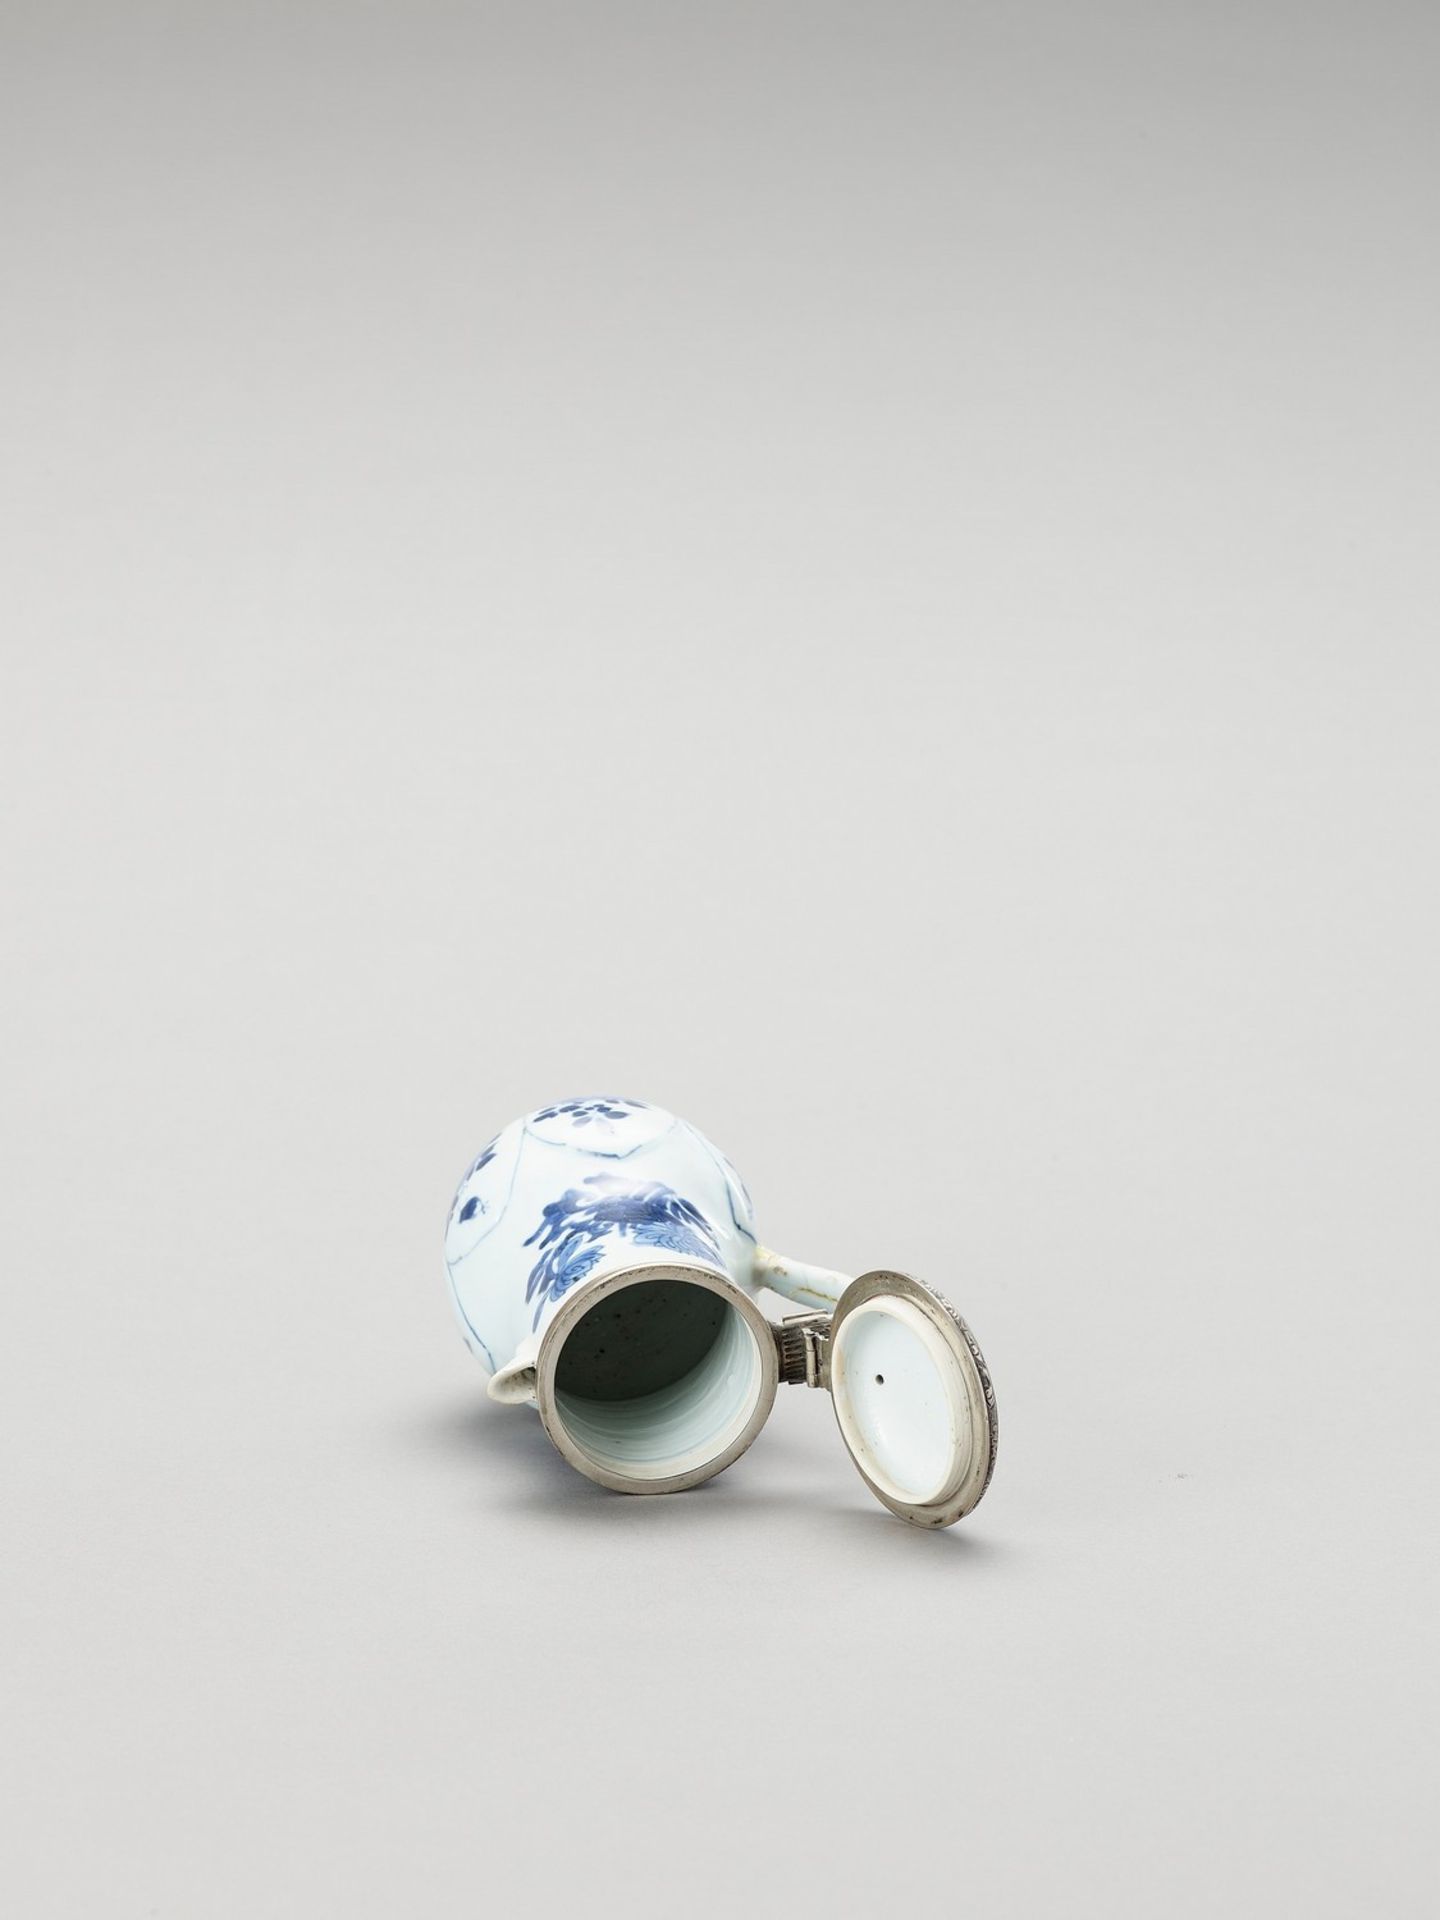 A SILVER-MOUNTED BLUE AND WHITE PORCELAIN JUG - Image 7 of 7